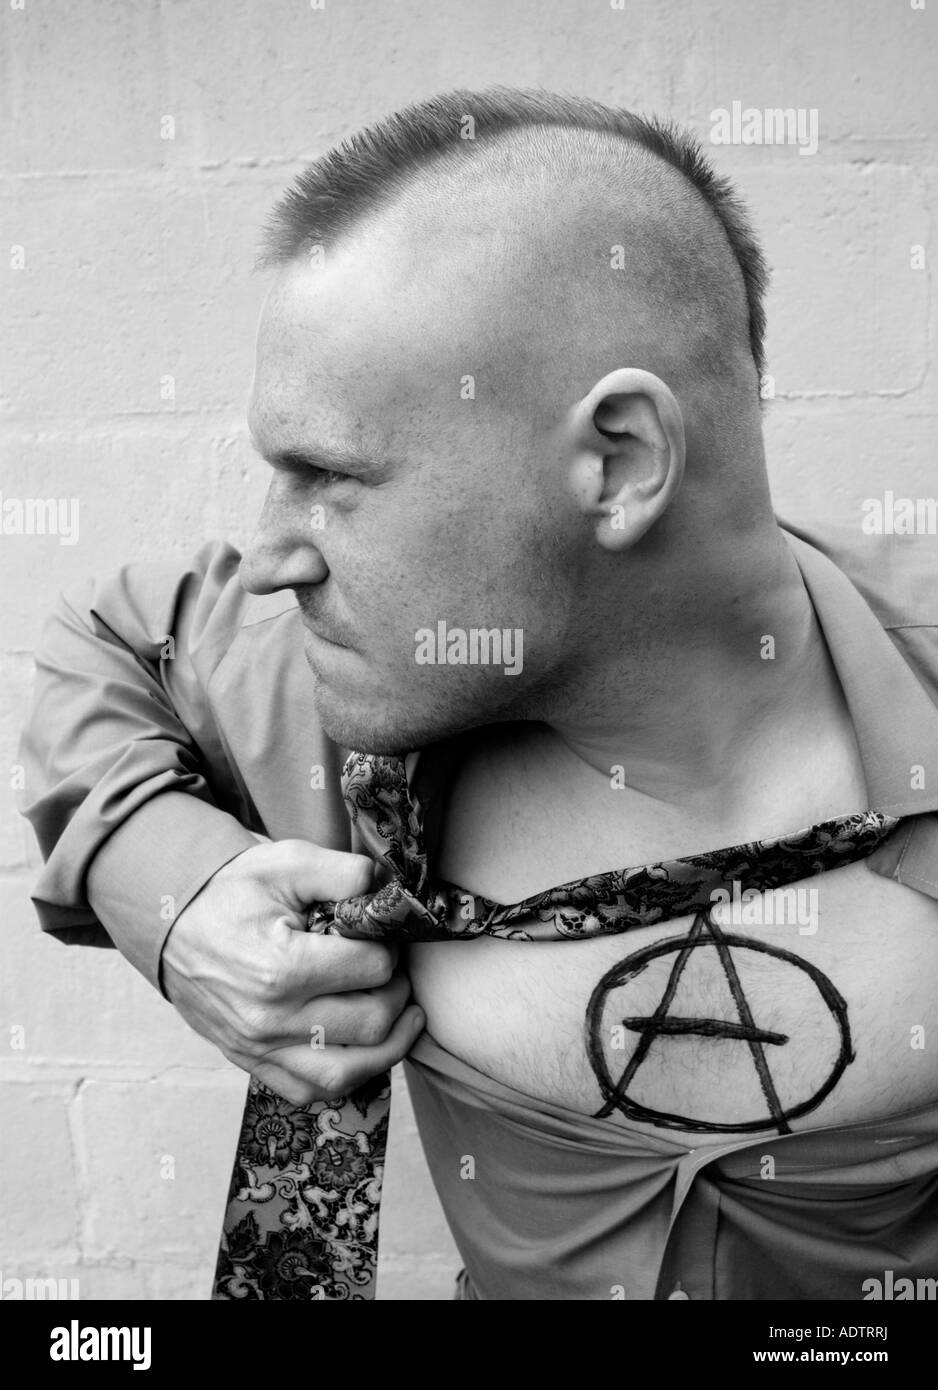 Anarchy Punk. Man ripping his shirt to reveal the Anarchy sign. Stock Photo